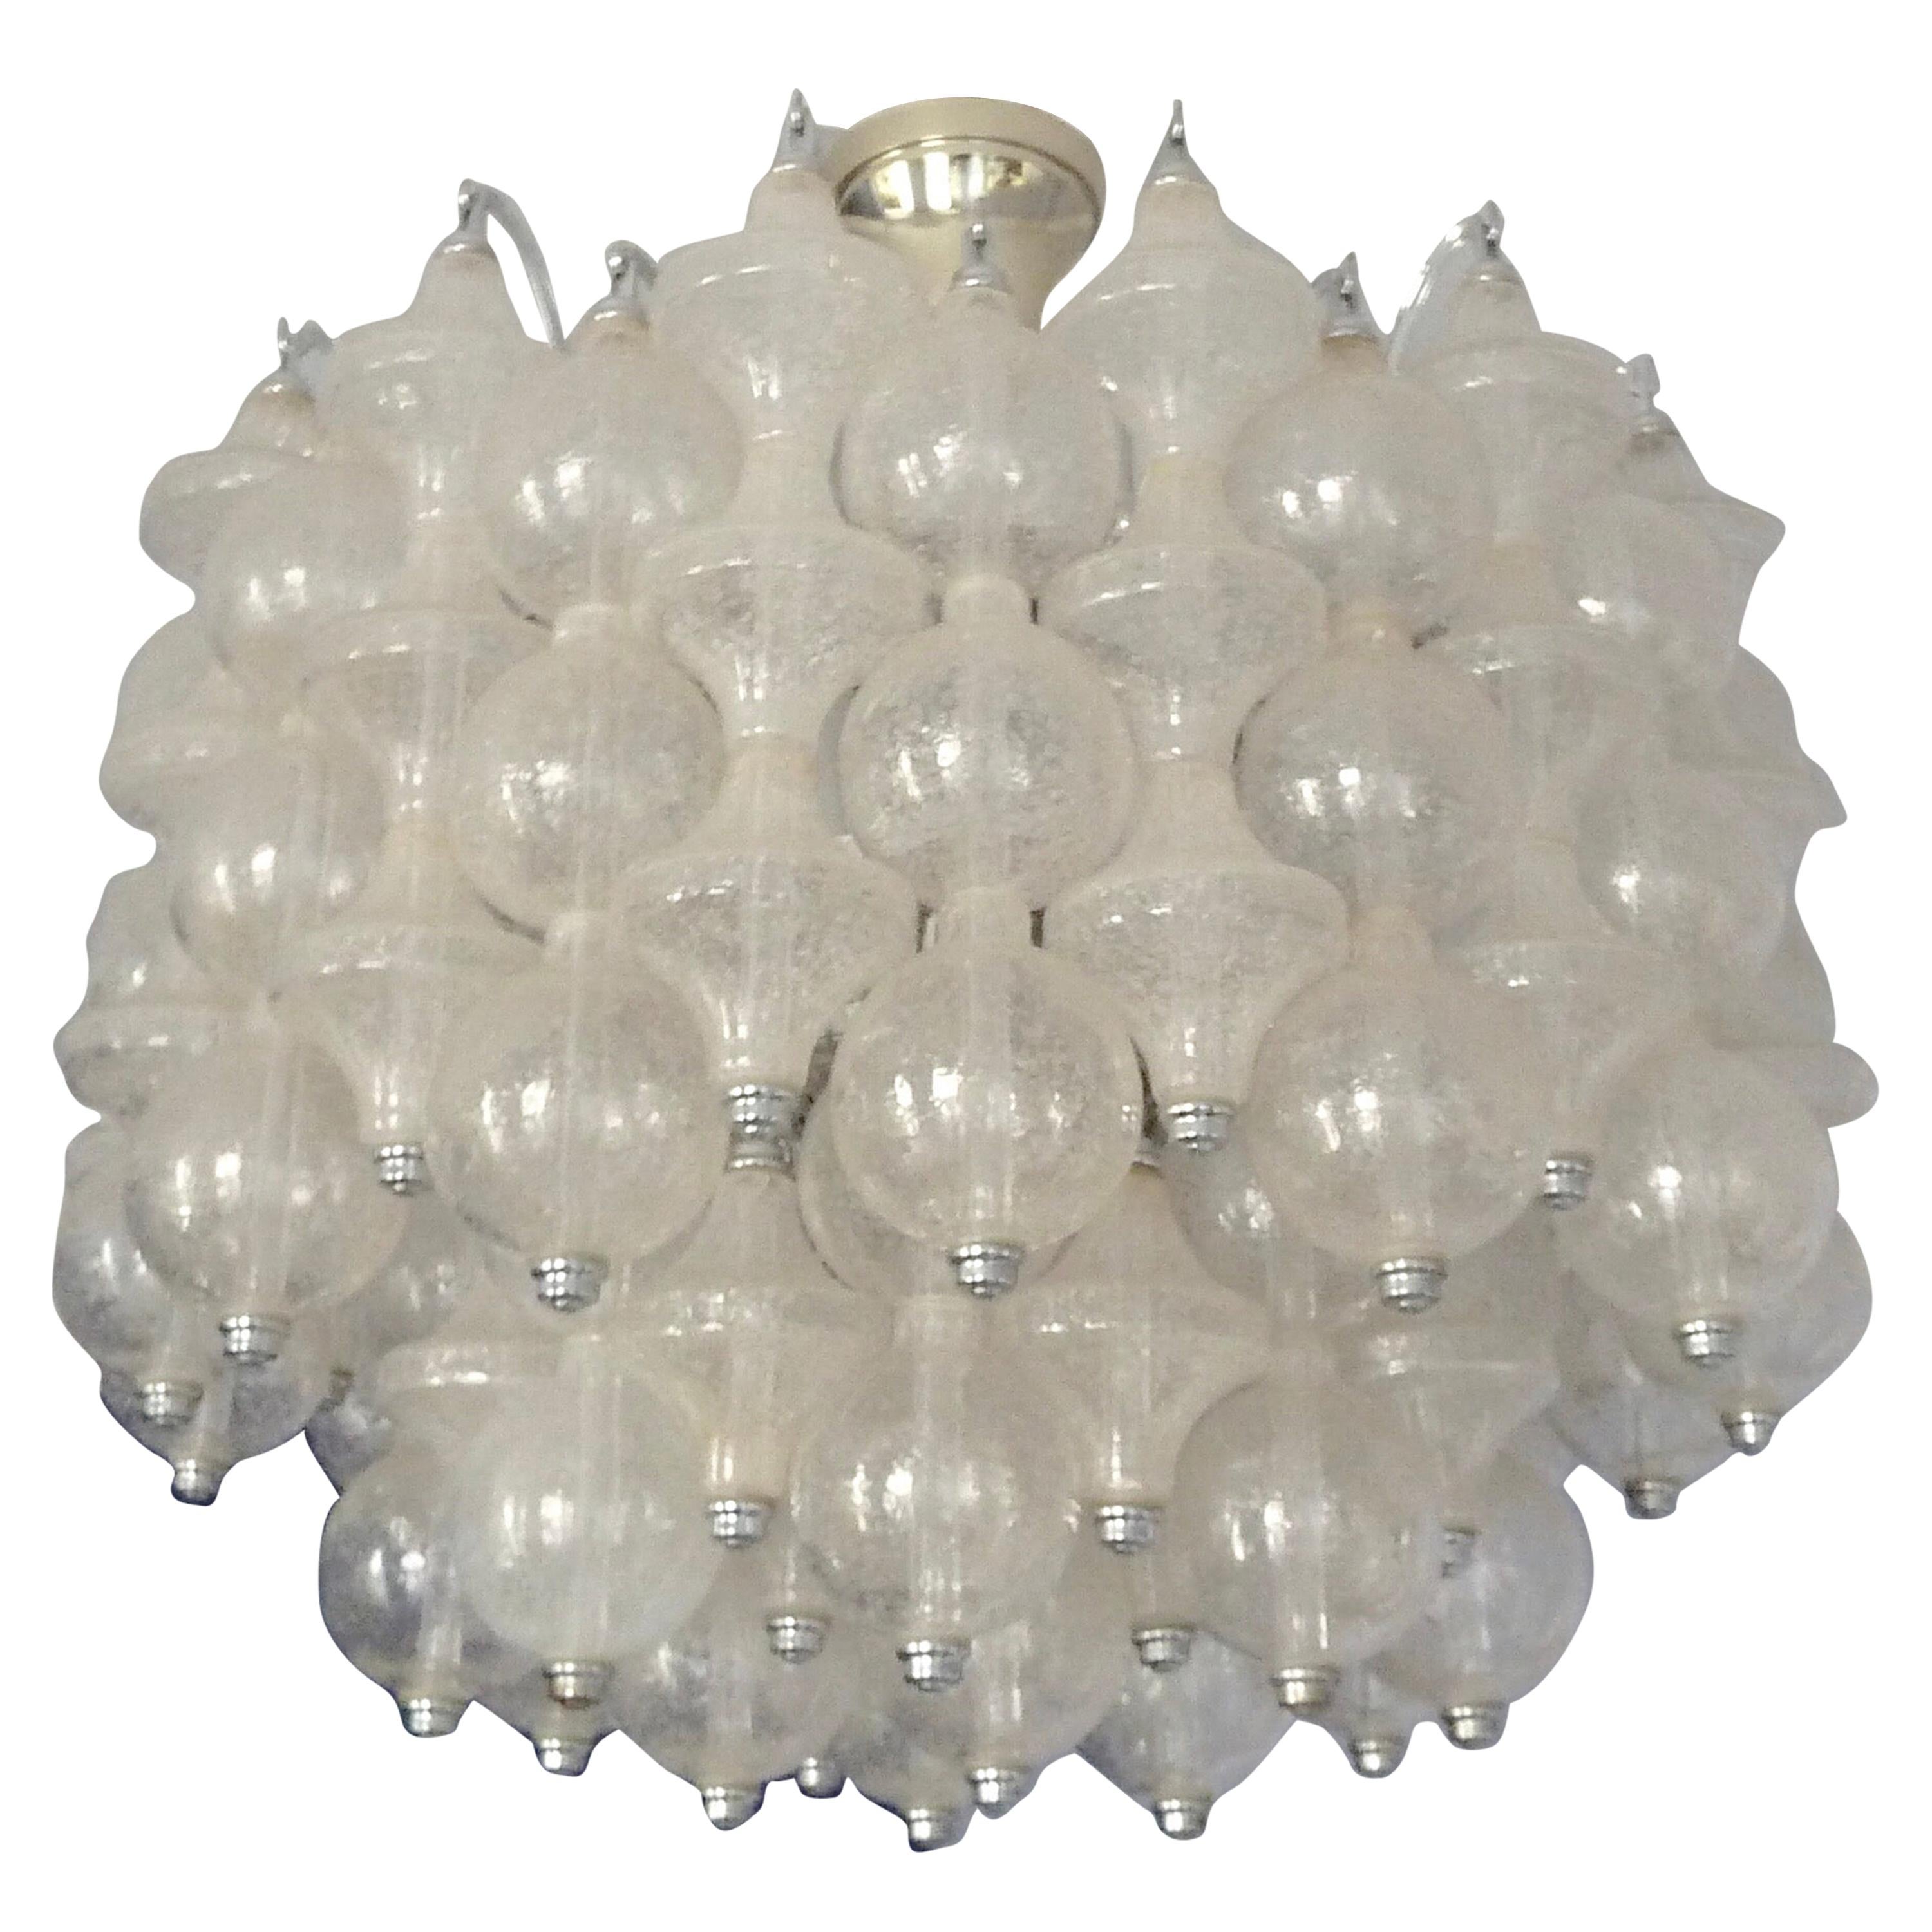 Rare Large and Bright 1970s Murano Seguso Ball Chandelier by OTT International